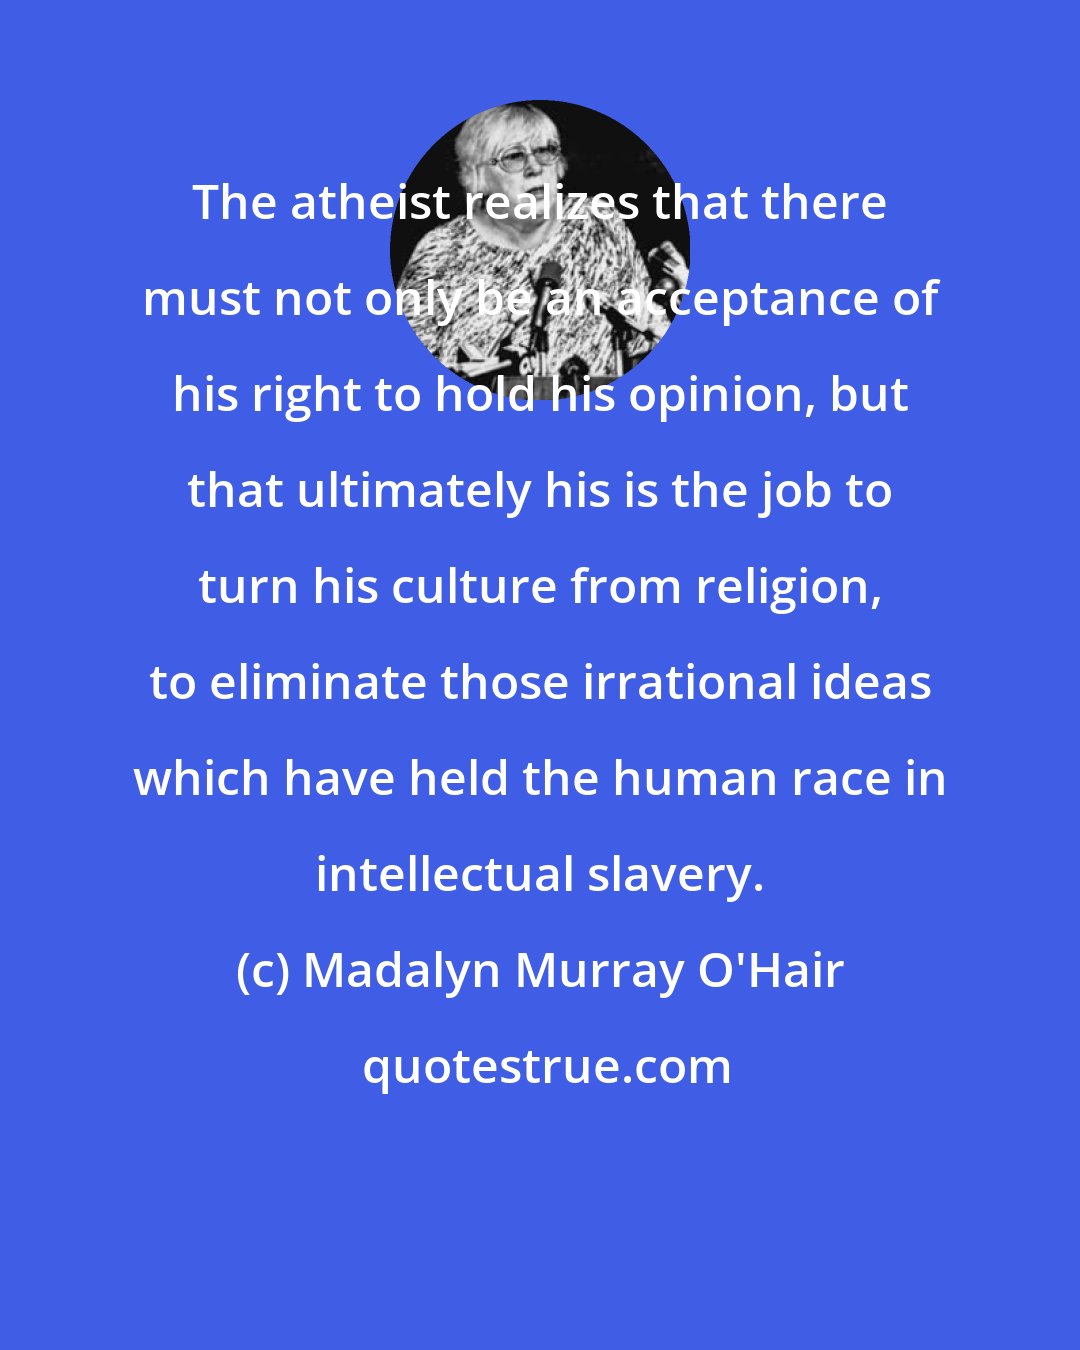 Madalyn Murray O'Hair: The atheist realizes that there must not only be an acceptance of his right to hold his opinion, but that ultimately his is the job to turn his culture from religion, to eliminate those irrational ideas which have held the human race in intellectual slavery.